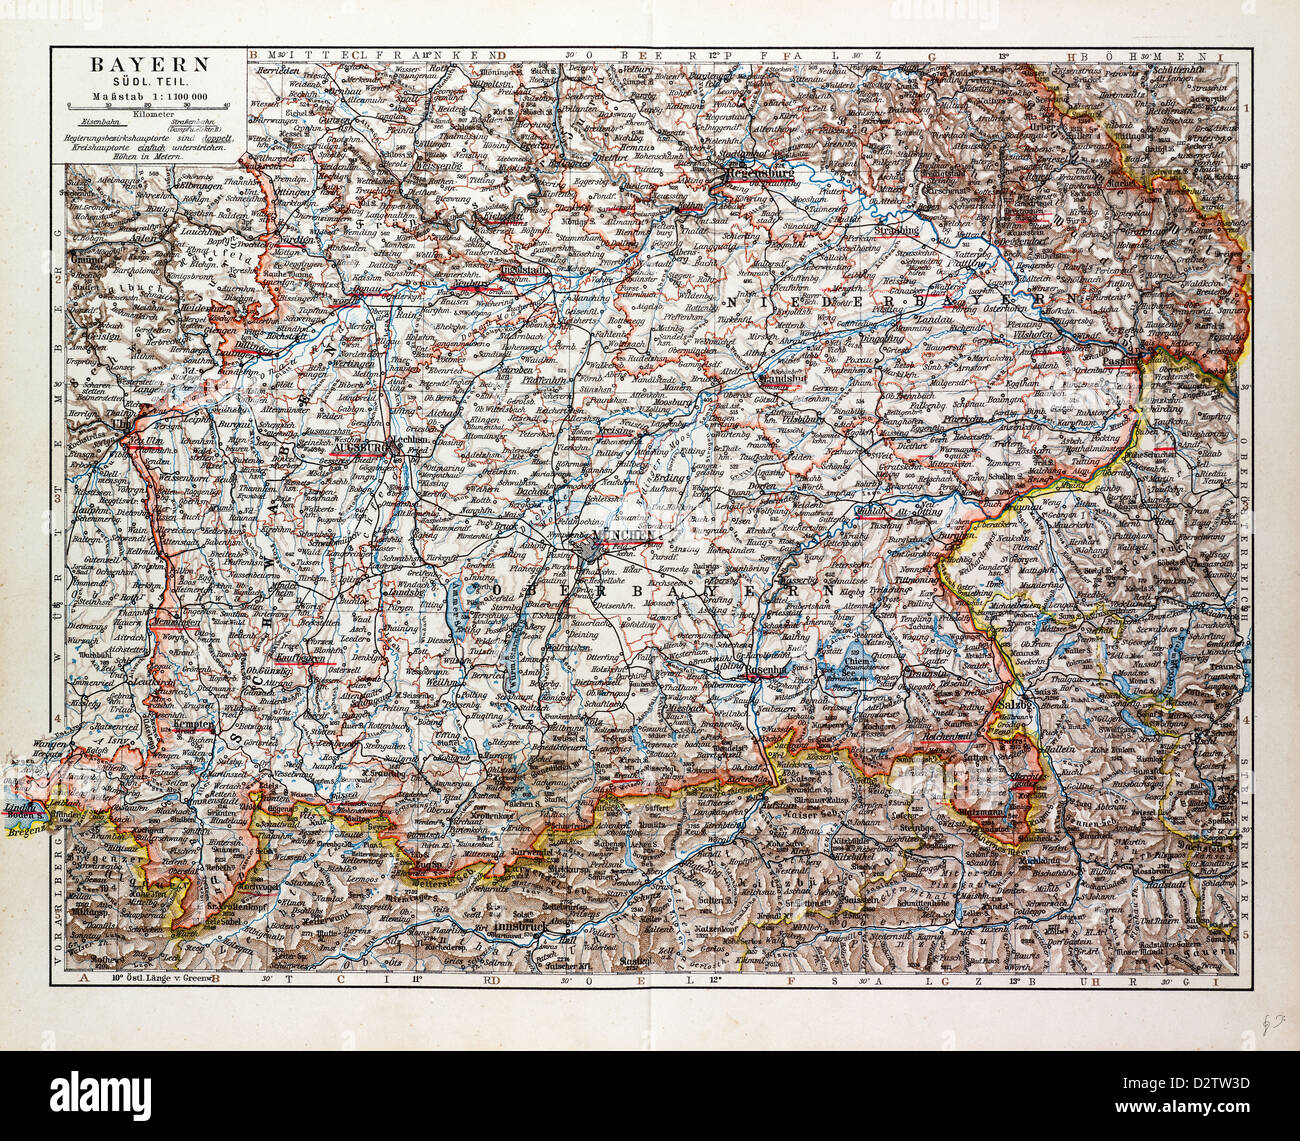 MAP OF THE SOUTHERN PART OF BAVARIA GERMANY 1899 Stock Photo